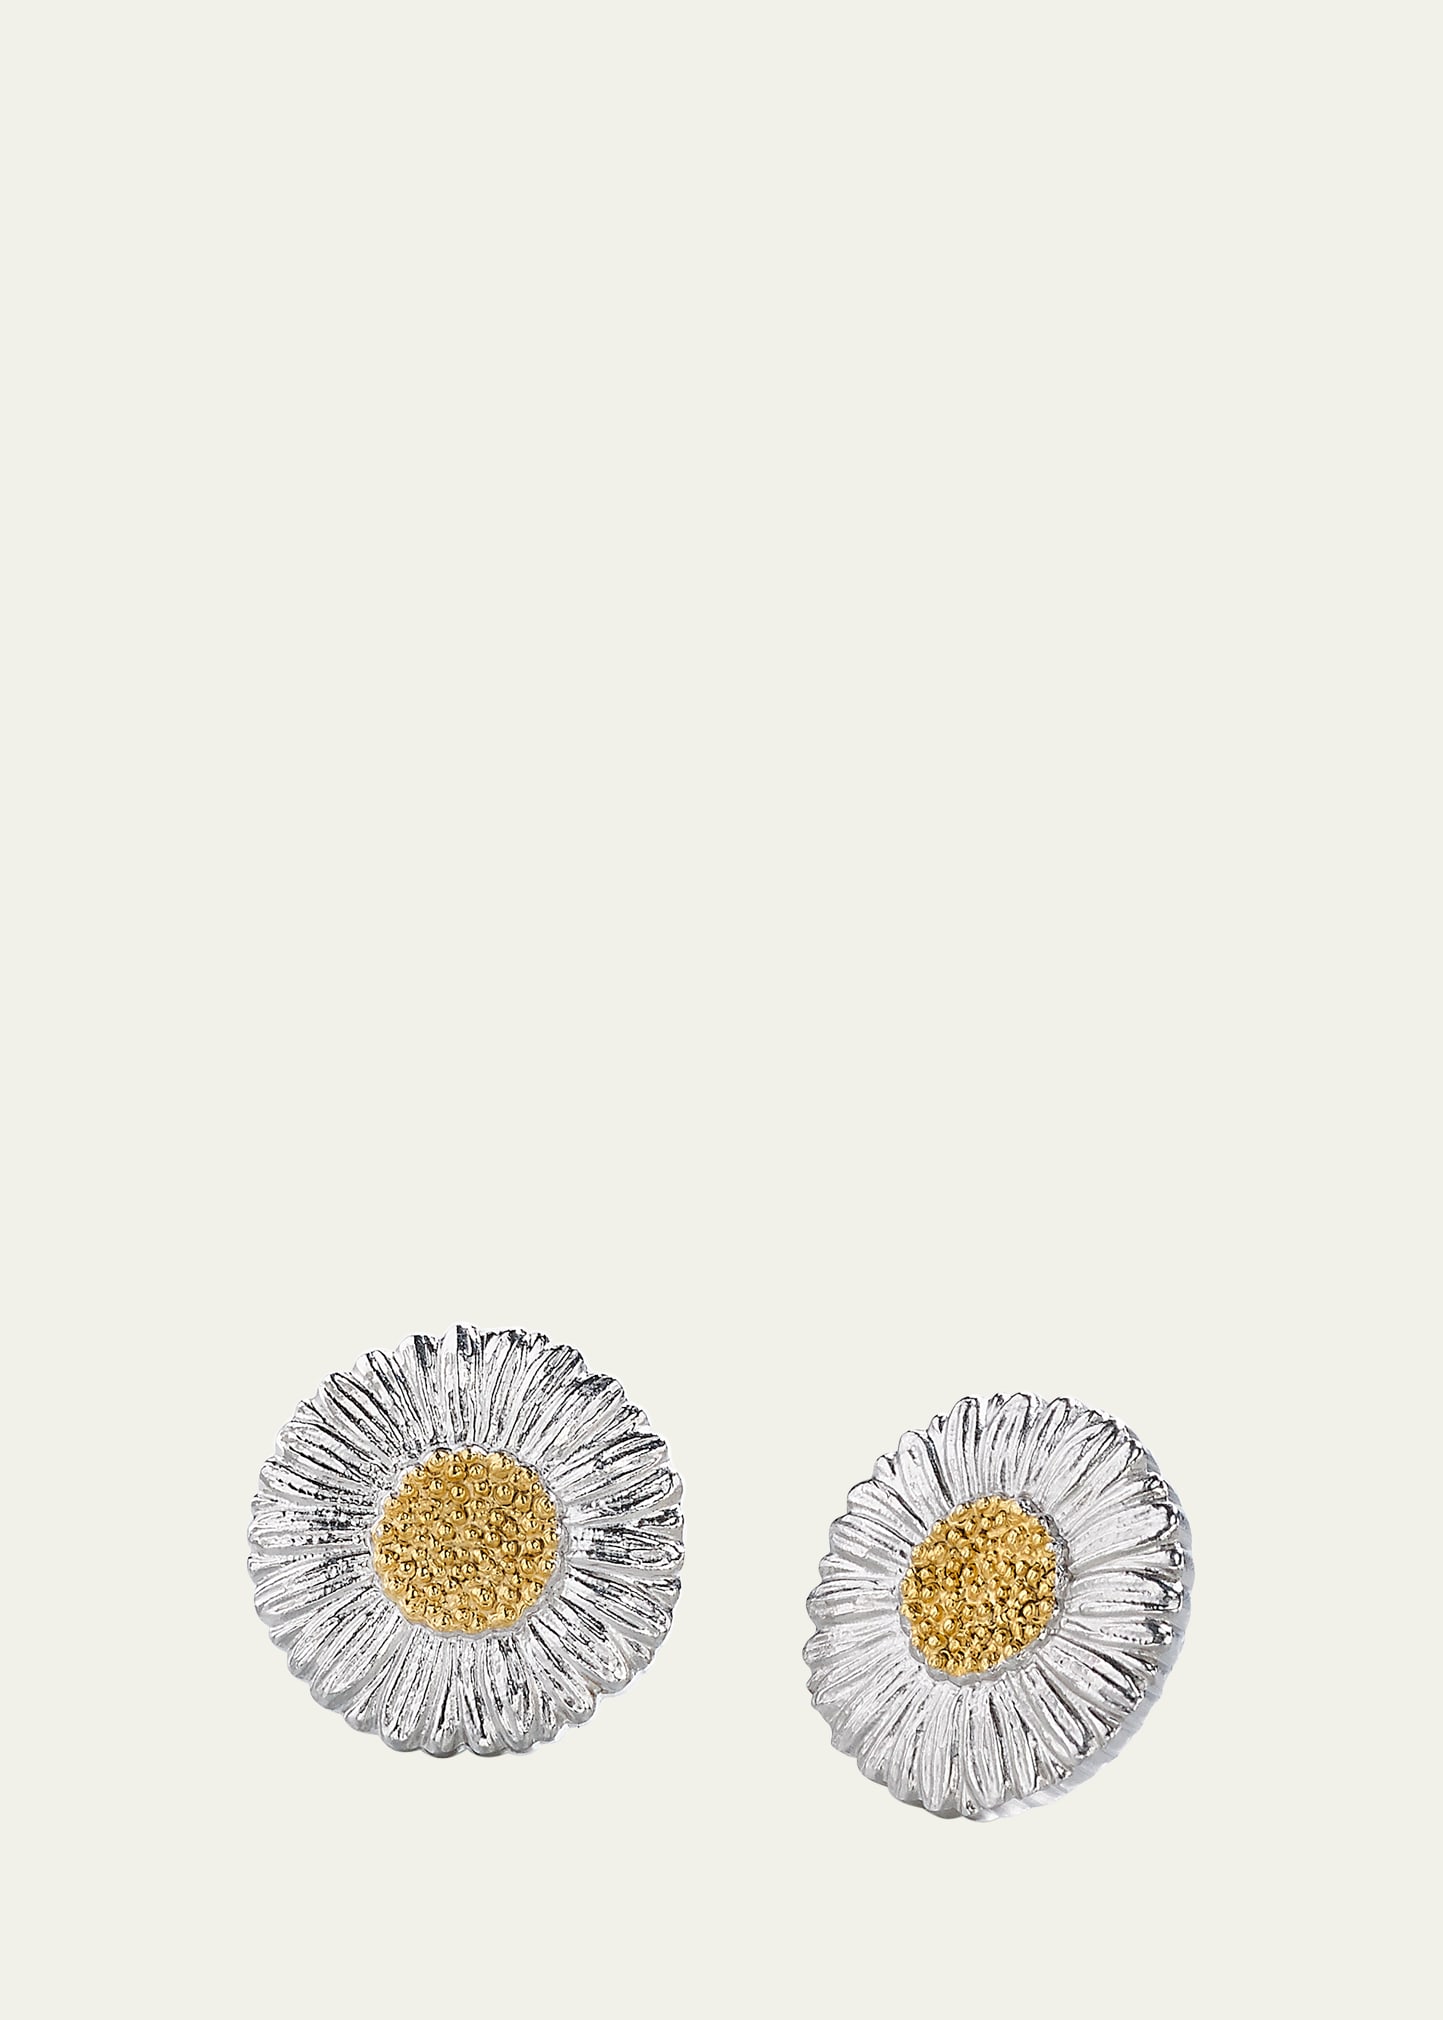 Blossoms Daisy Sterling Silver and 18K Yellow Gold Button Earrings, 1.6cm